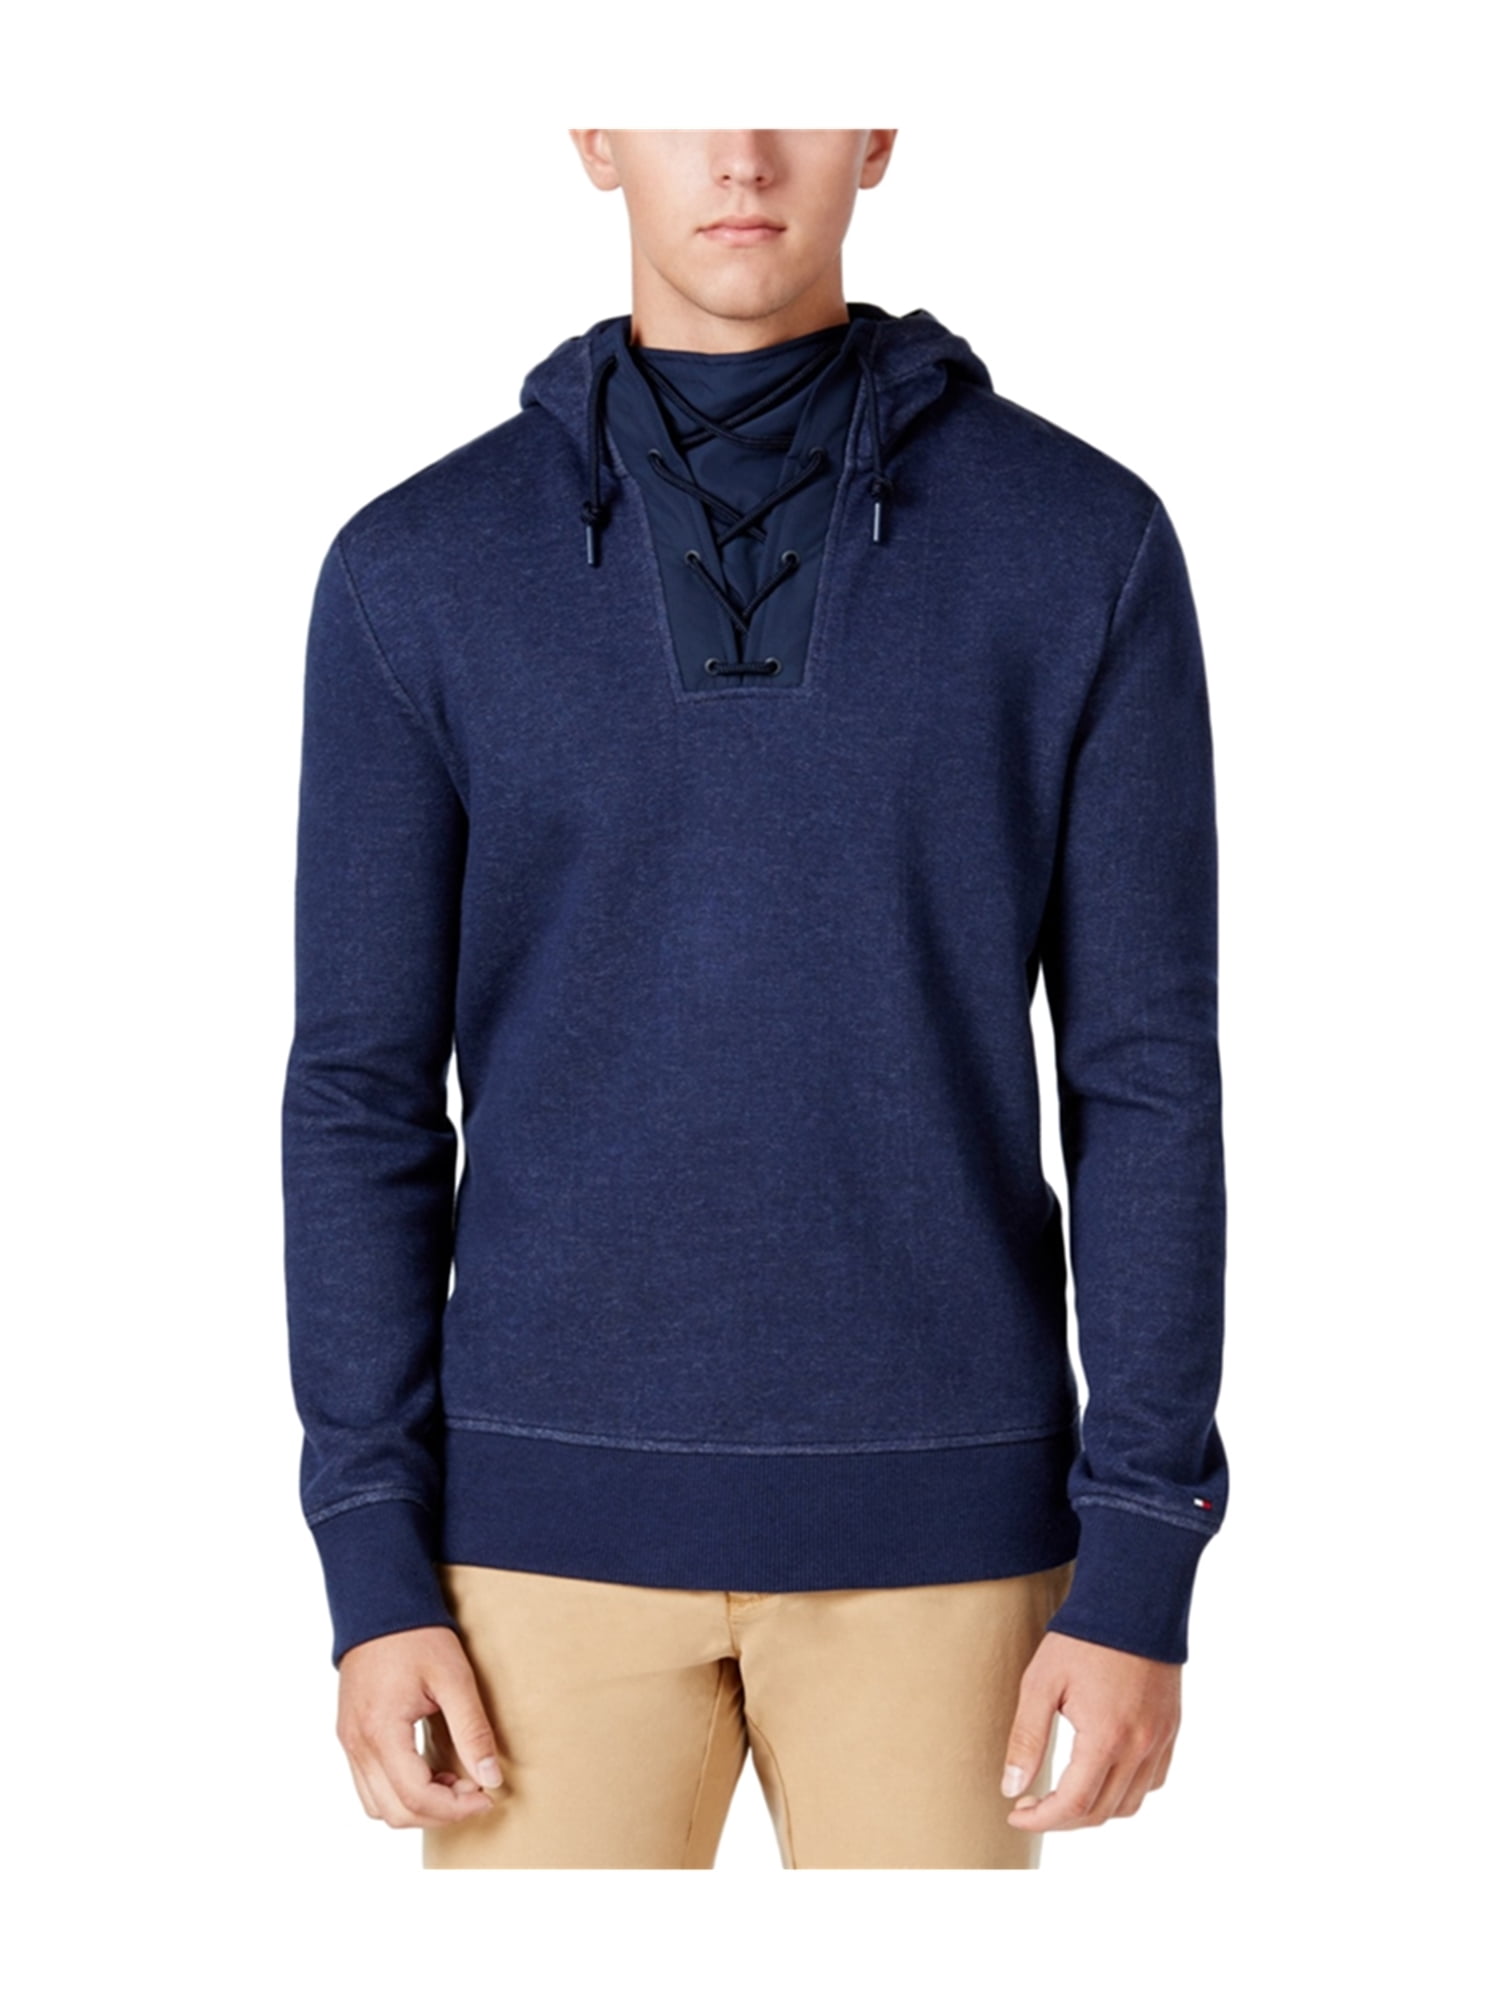 Tommy Hilfiger - Tommy Hilfiger Mens Abley Lace-Up Hoodie Sweatshirt ...